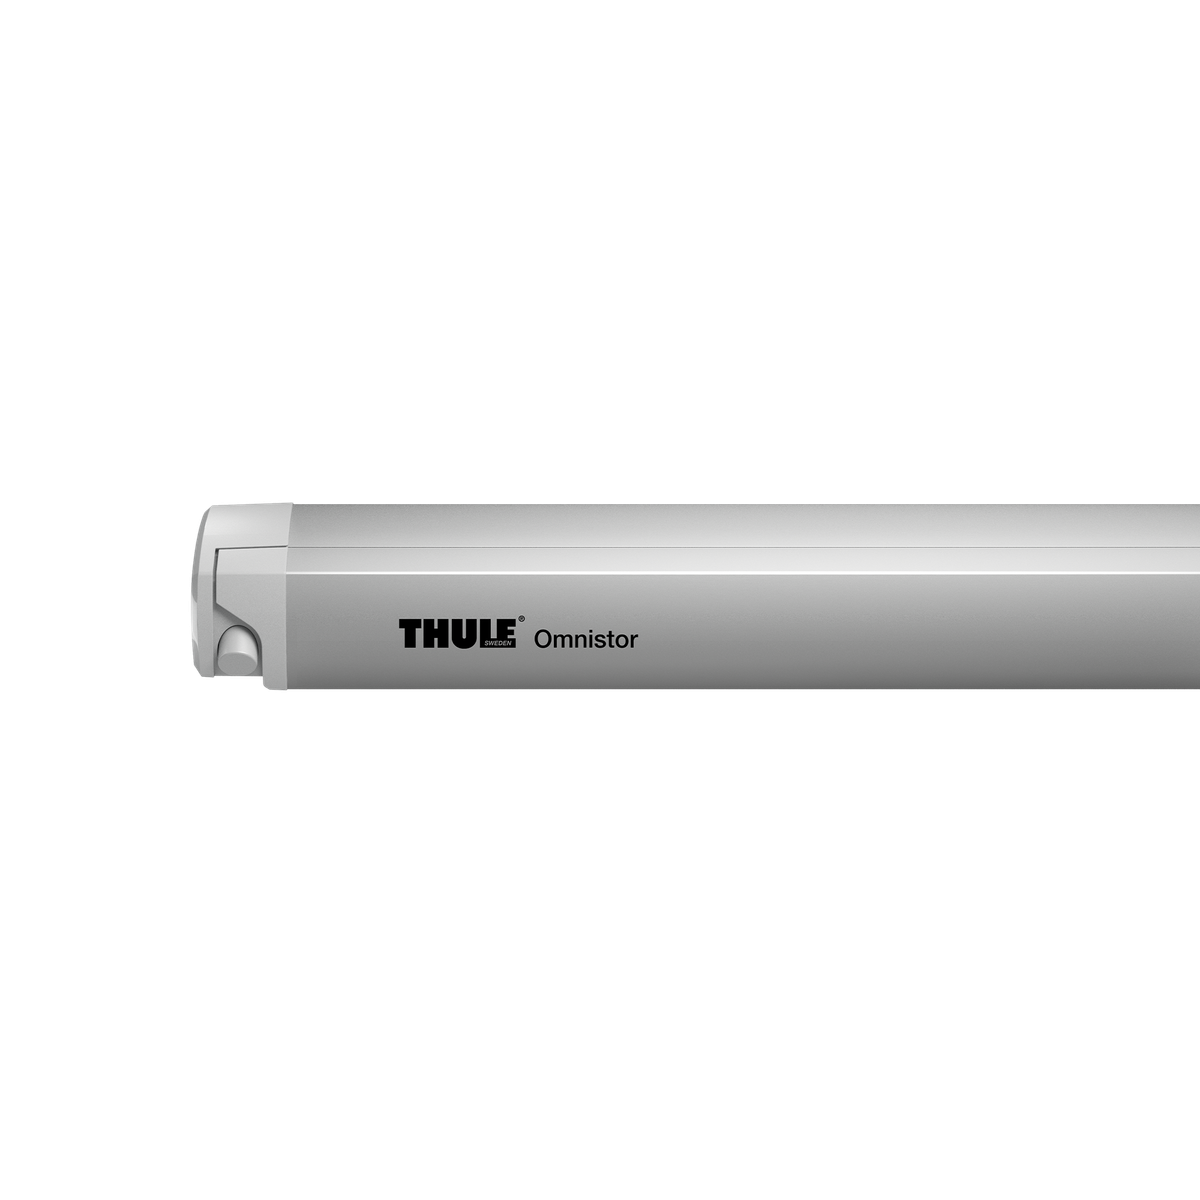 Thule Omnistor 9200 motorized roof awning 6.00x3.00m anodised gray